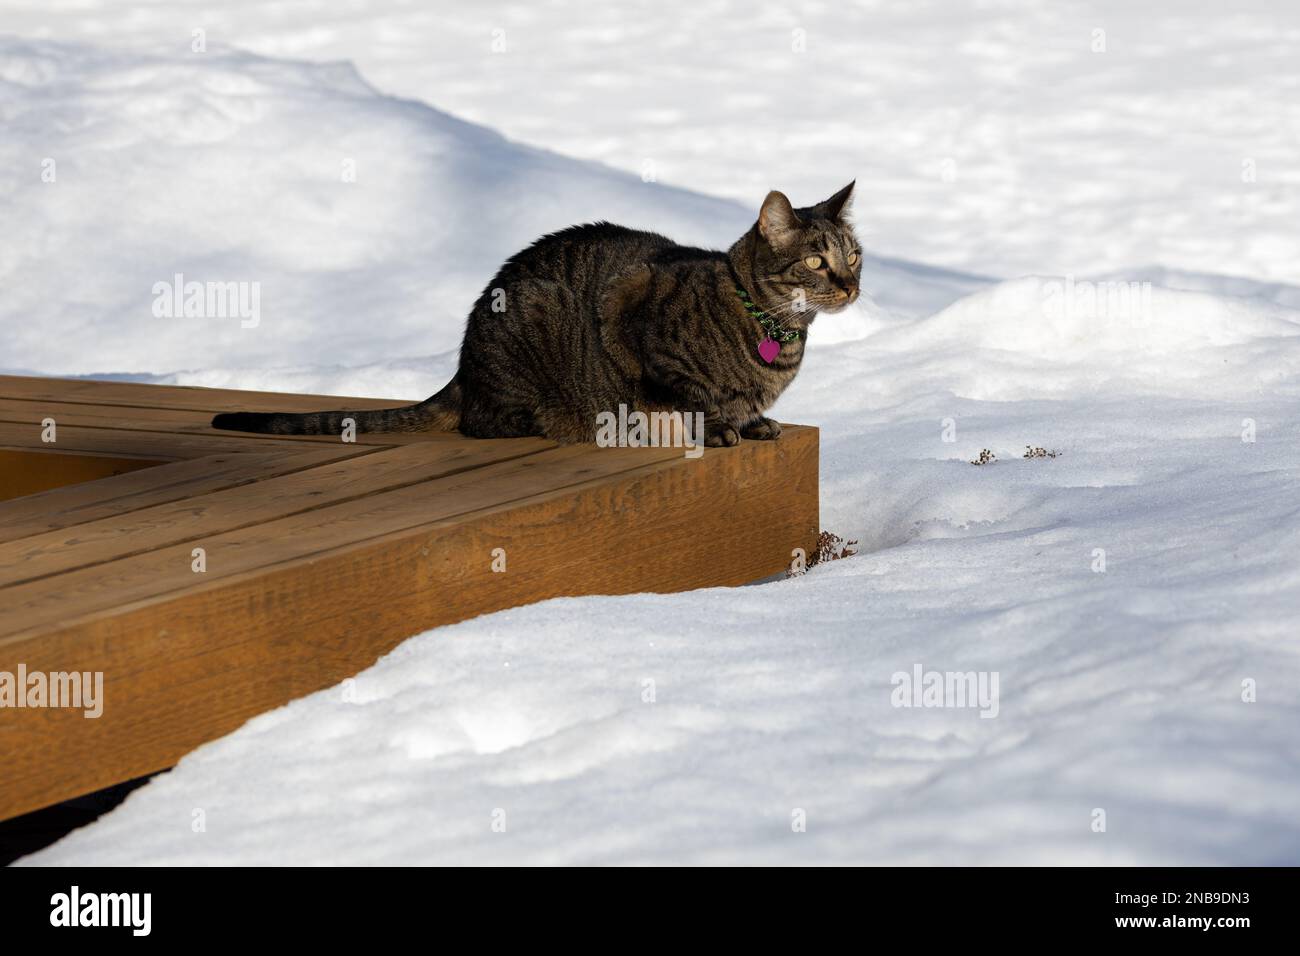 Close up portrait view of a gray striped tabby cat sitting on a wooden deck bench, surrounded with deep white snow, on a winter day Stock Photo